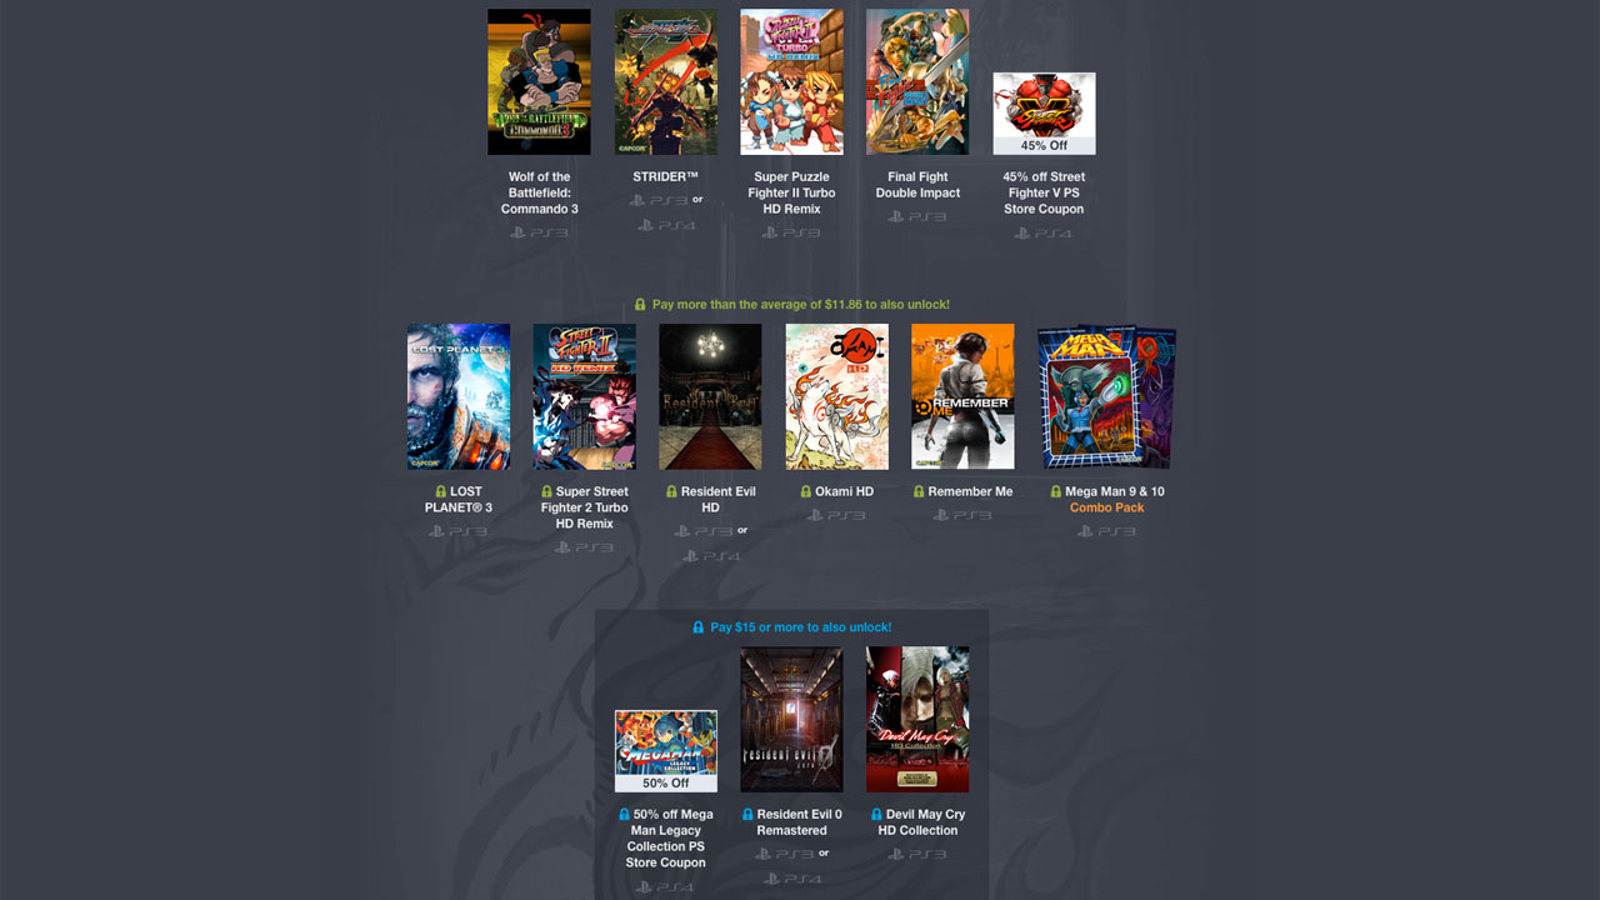 Humble Bundle Capcom Heroic Collection includes some big compilations